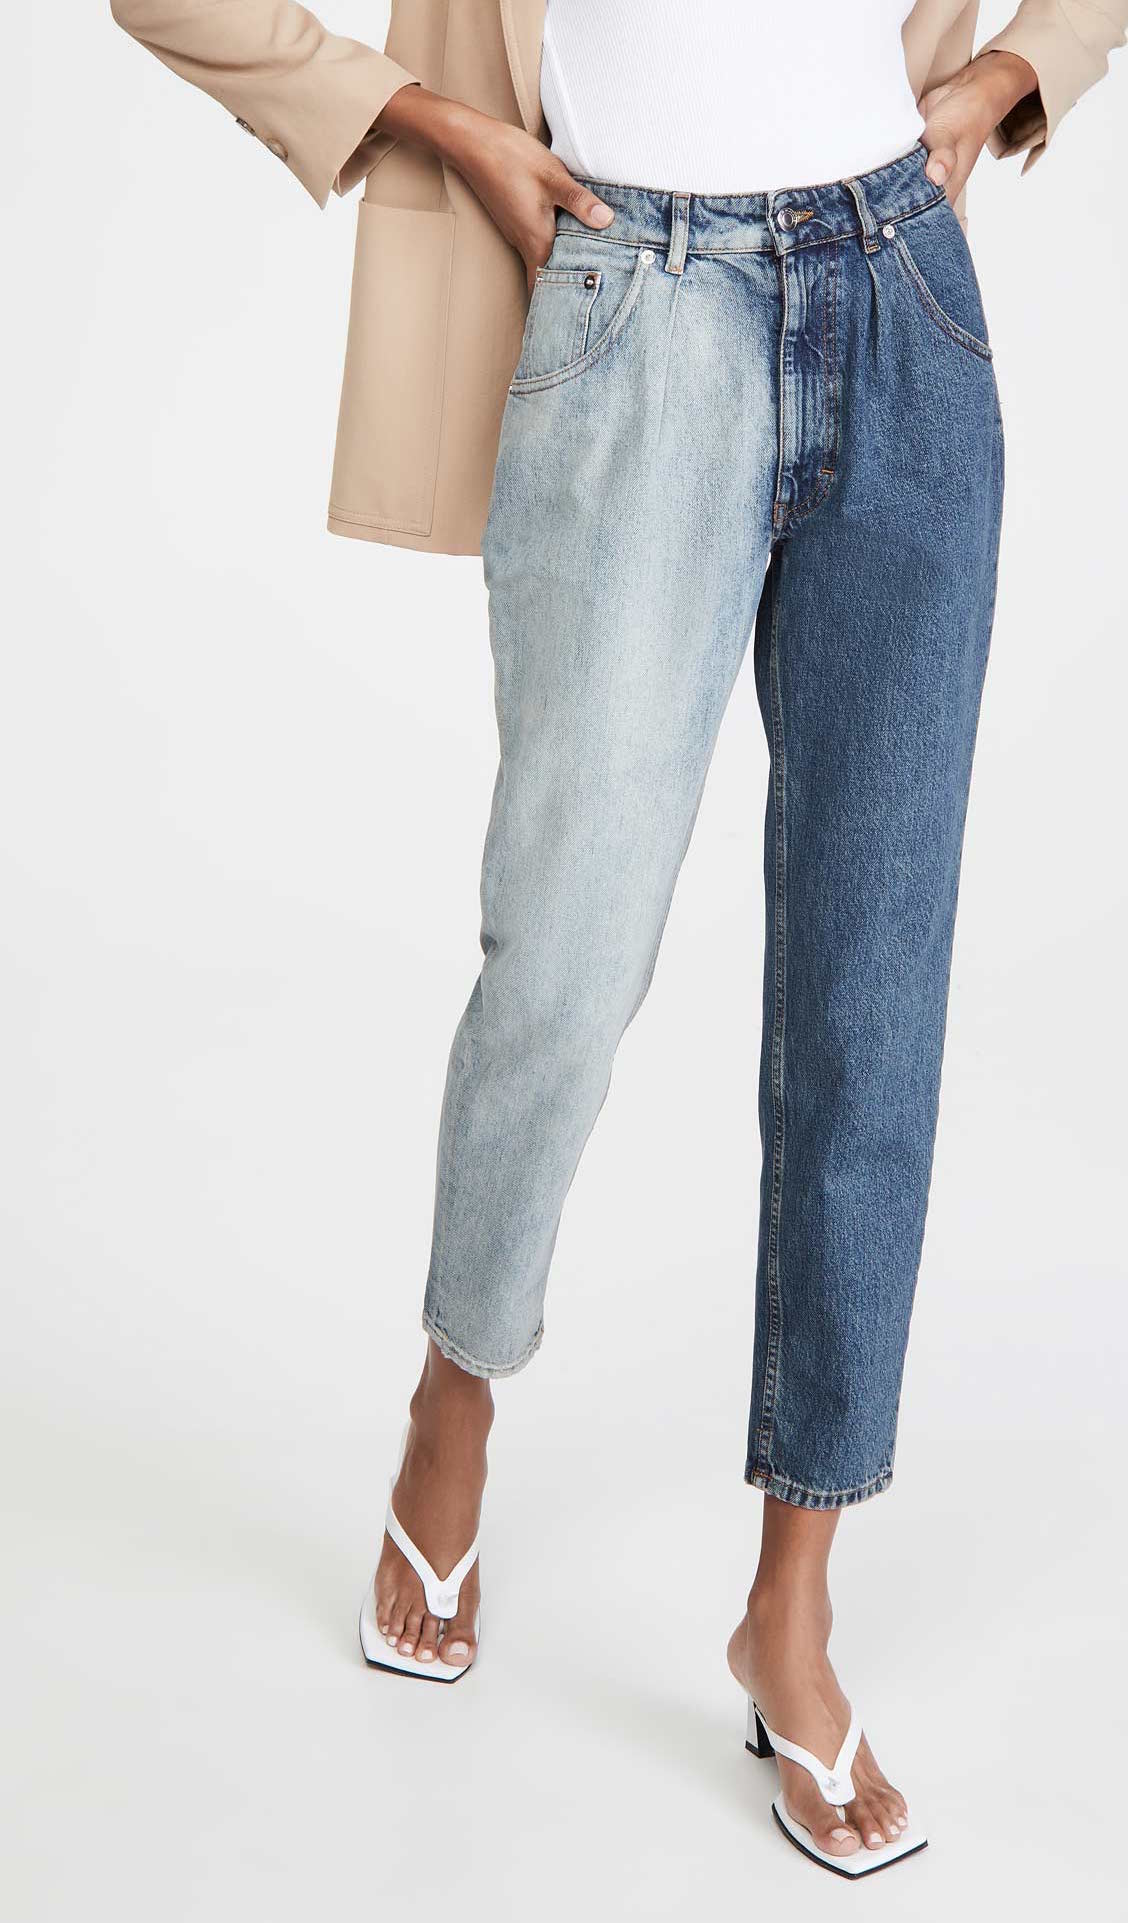 5 Bold & Funky Fall Jeans For Women